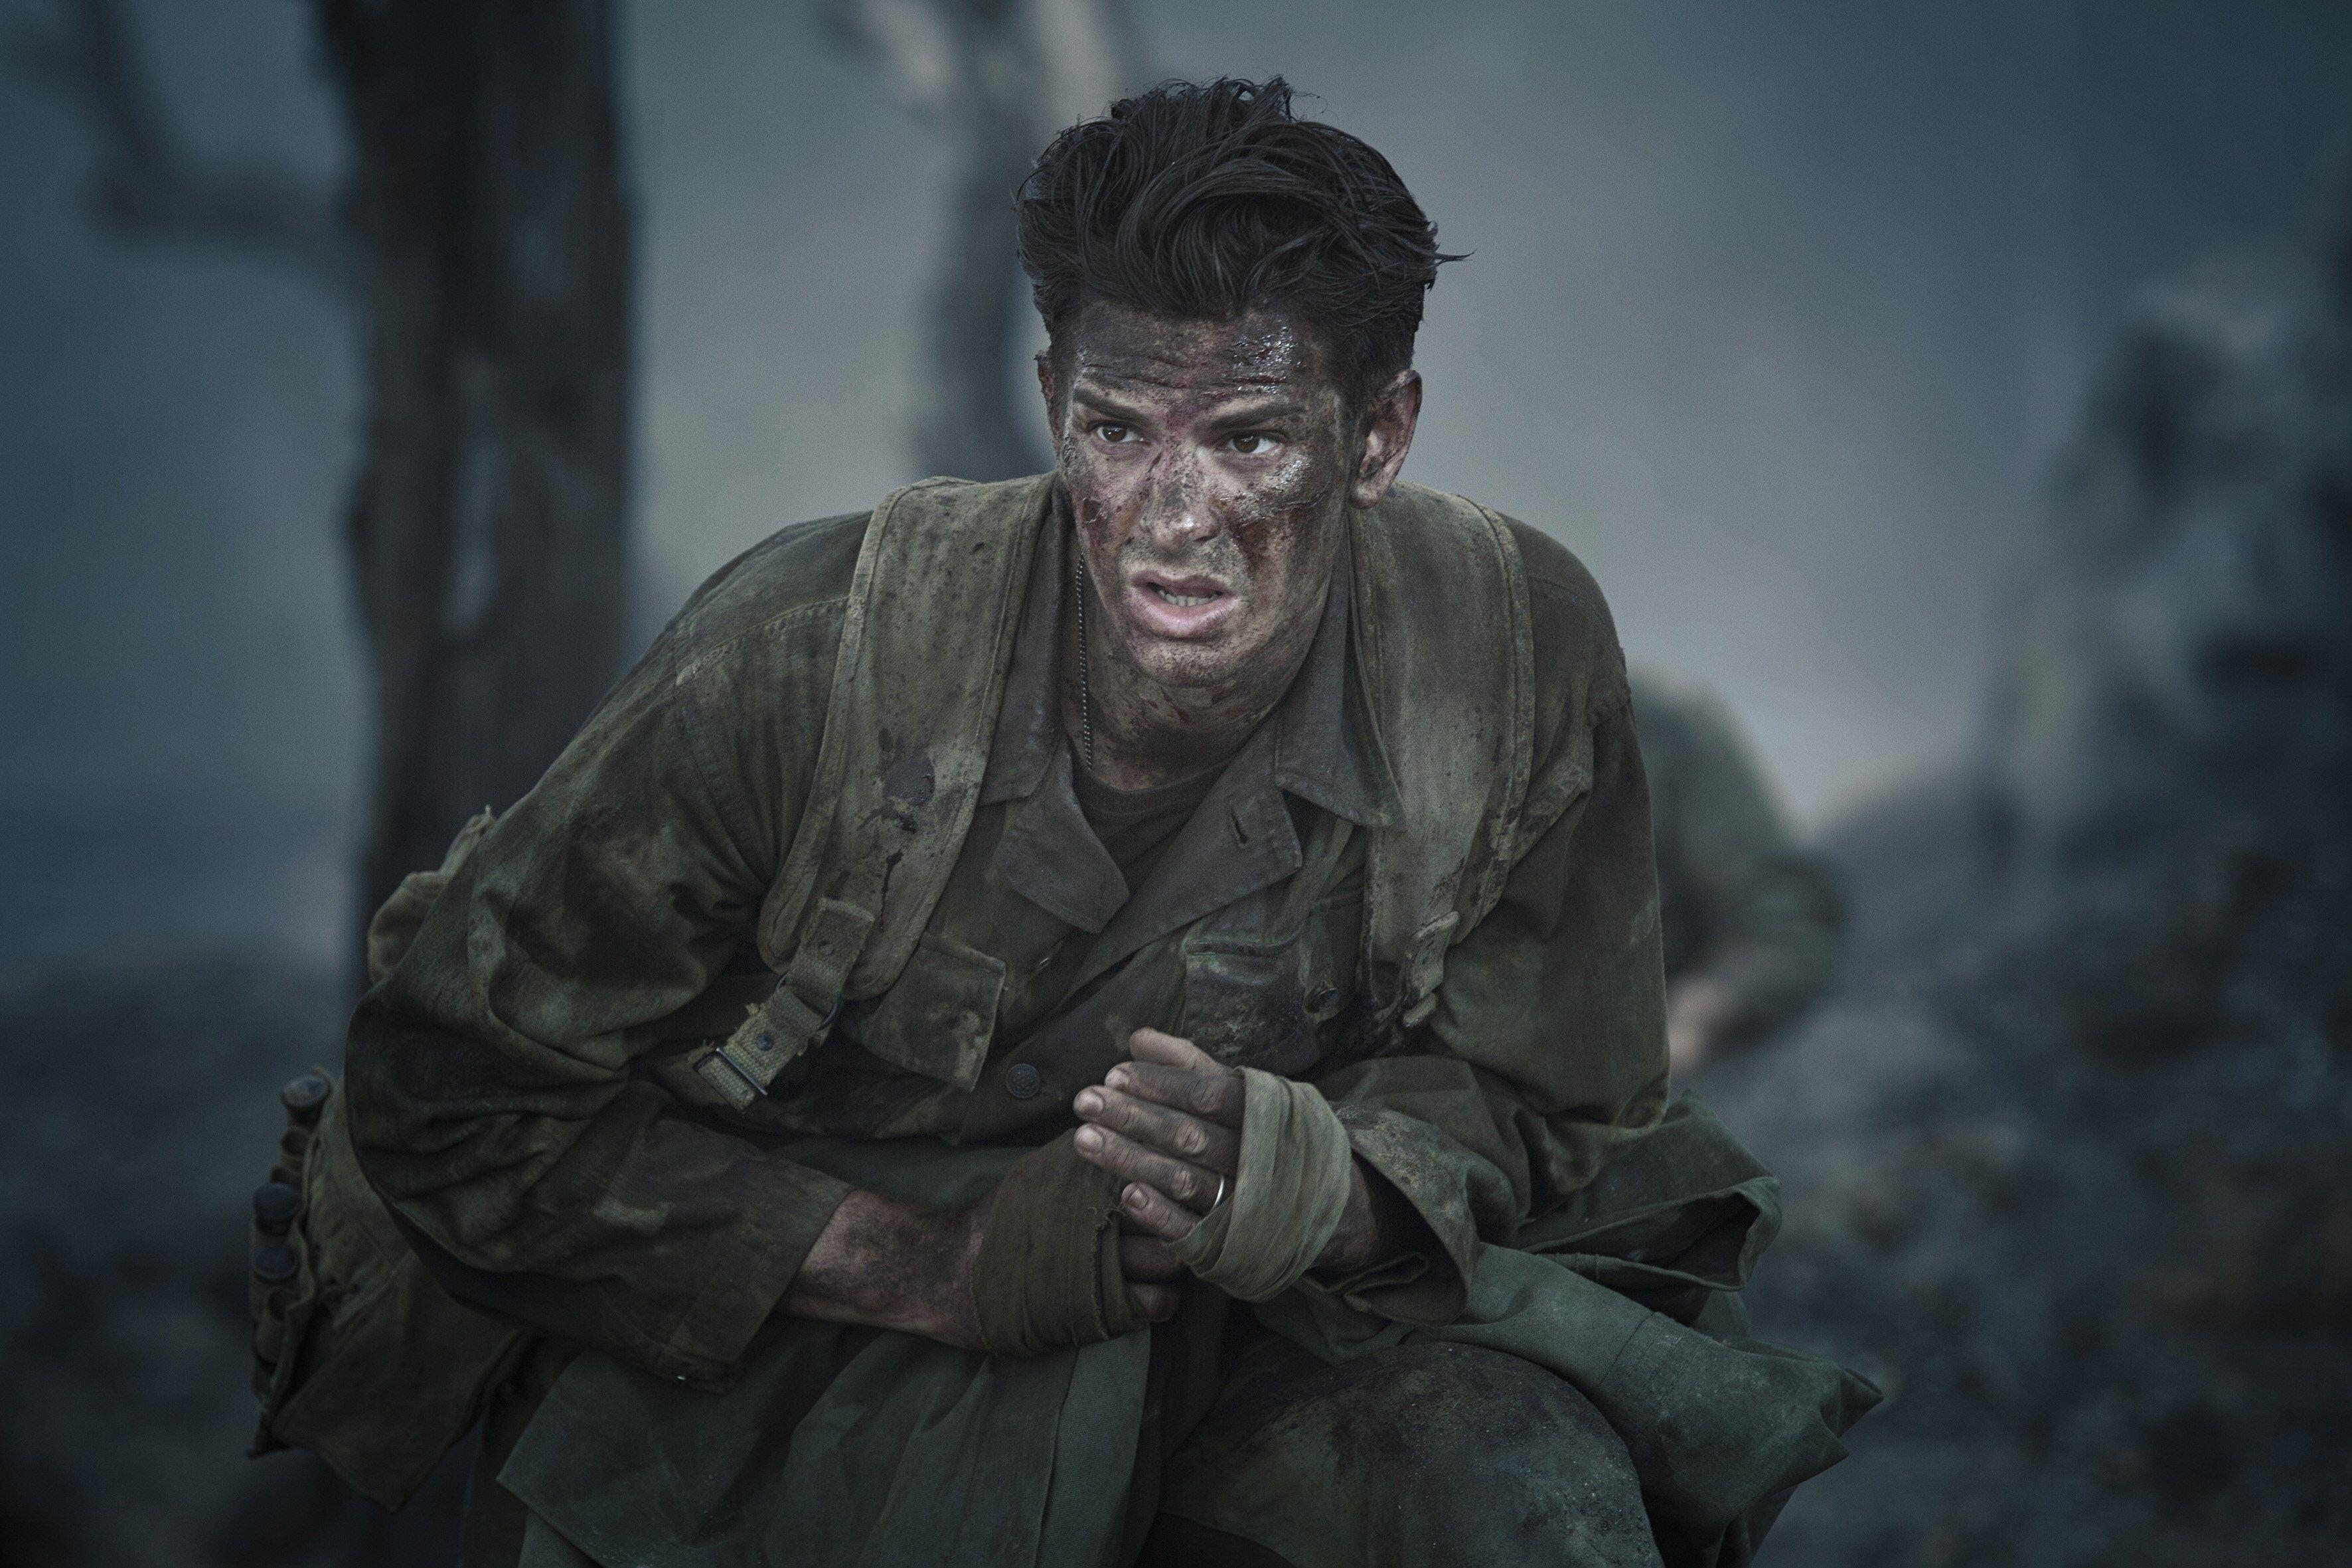 Andrew Garfield sneaks around the trenches of World War II while covered in soot and dirt